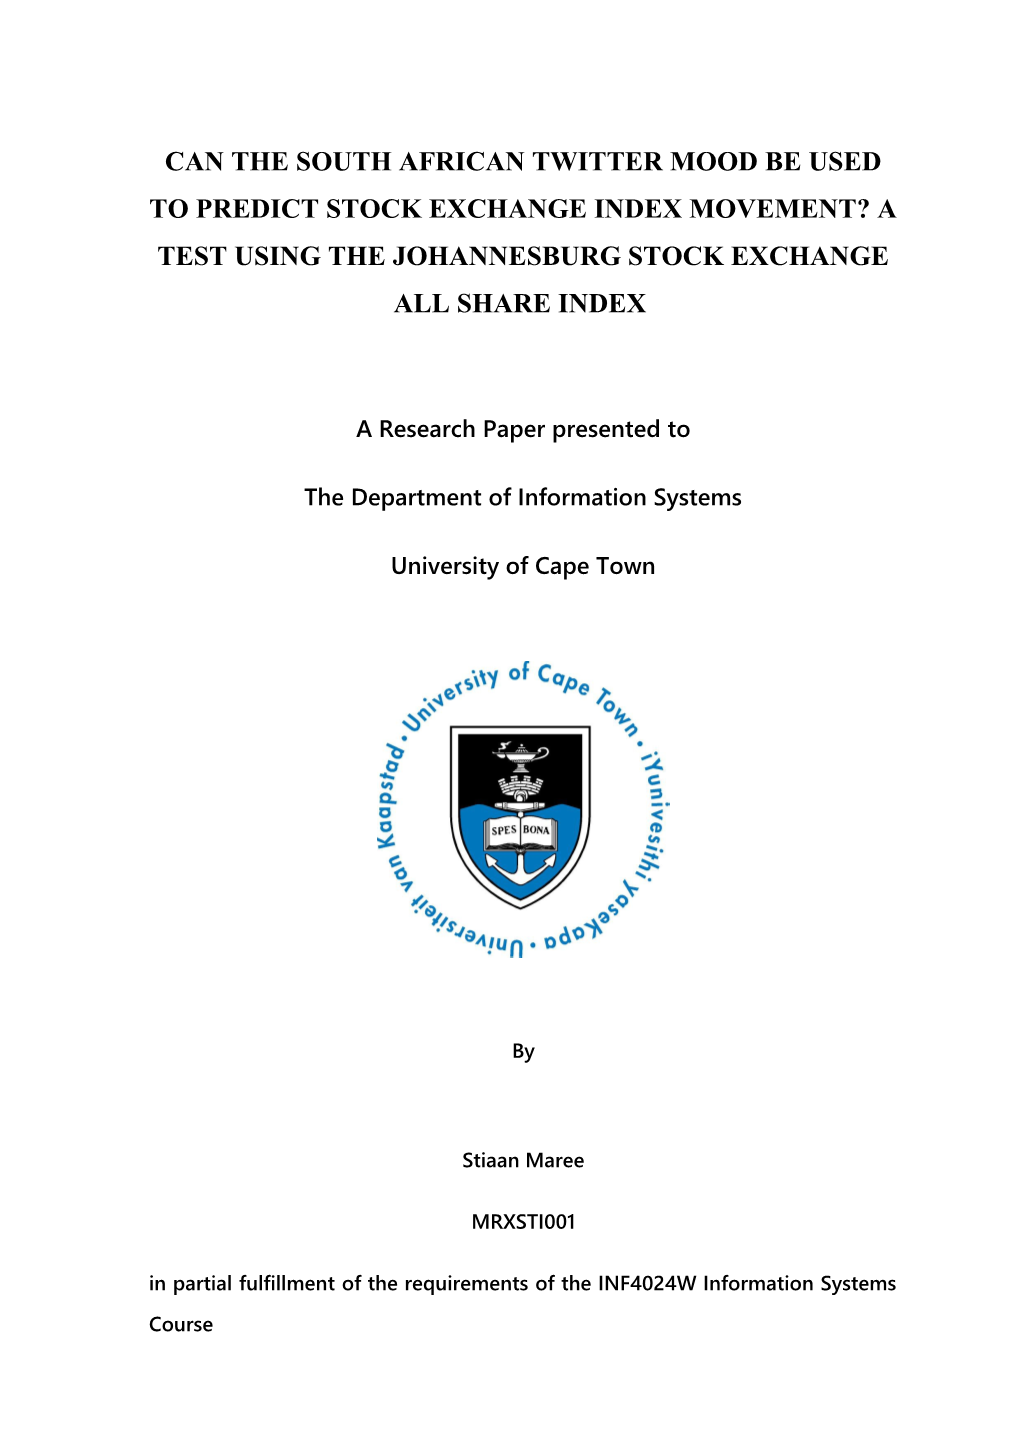 Can the South African Twitter Mood Be Used to Predict Stock Exchange Index Movement? A